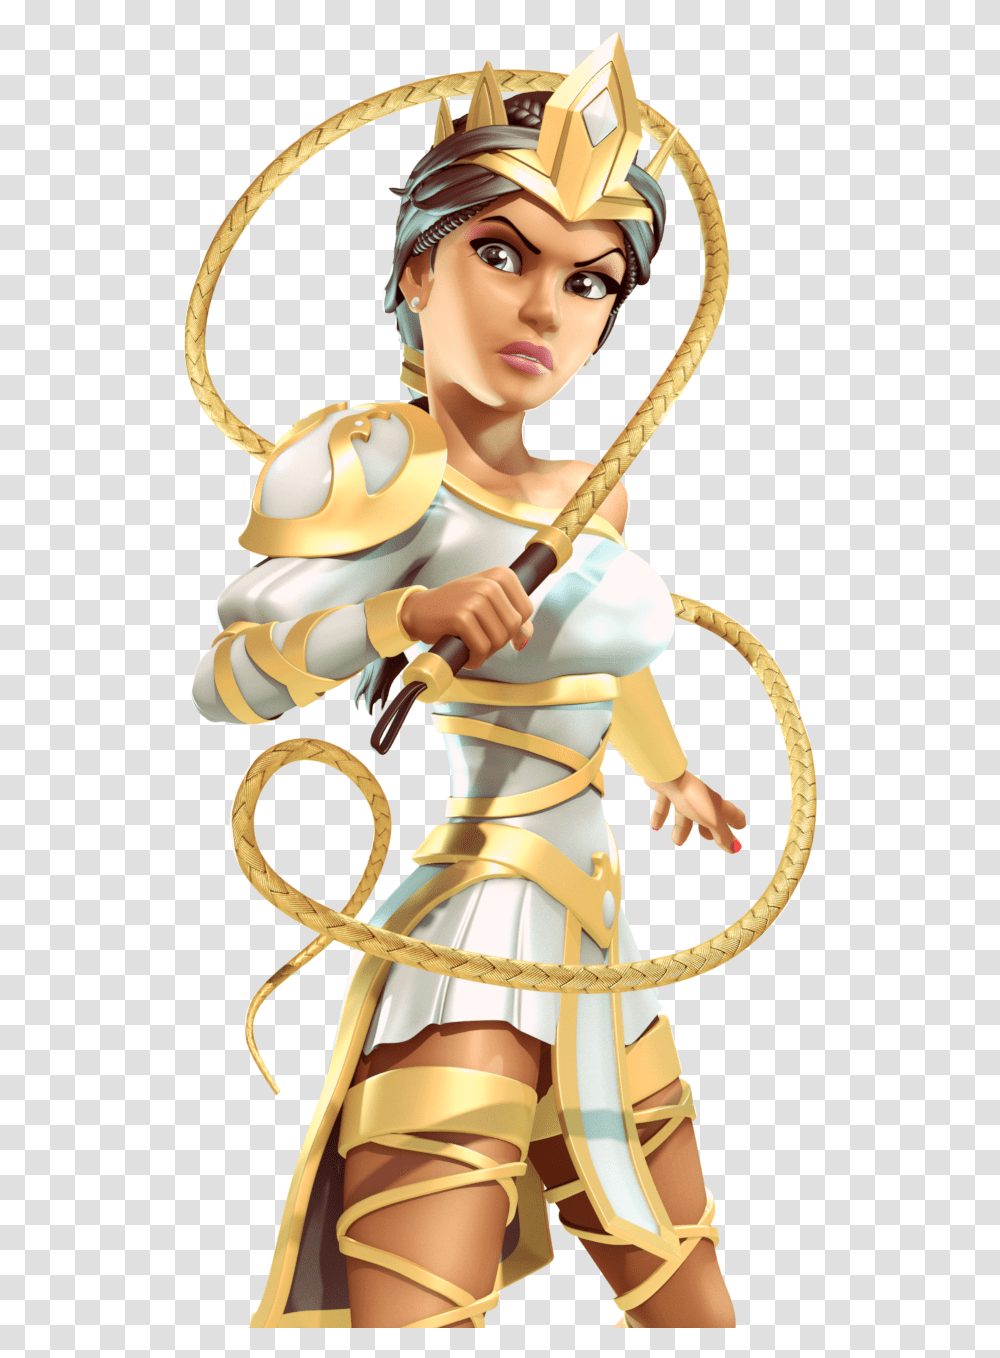 Gods Of Olympus Wikia Hera Gods Of Olympus, Person, Human, Leisure Activities, Figurine Transparent Png